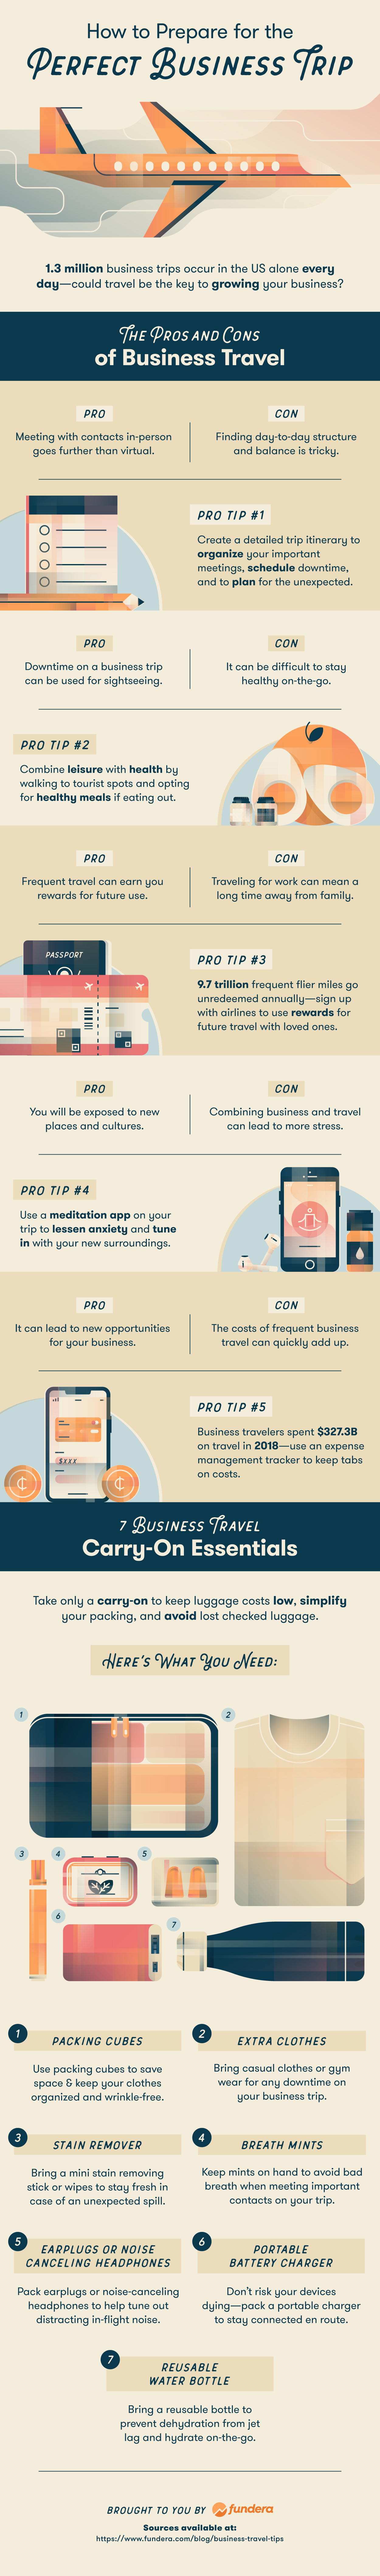 Infographic: How to Plan the Perfect Business Trip